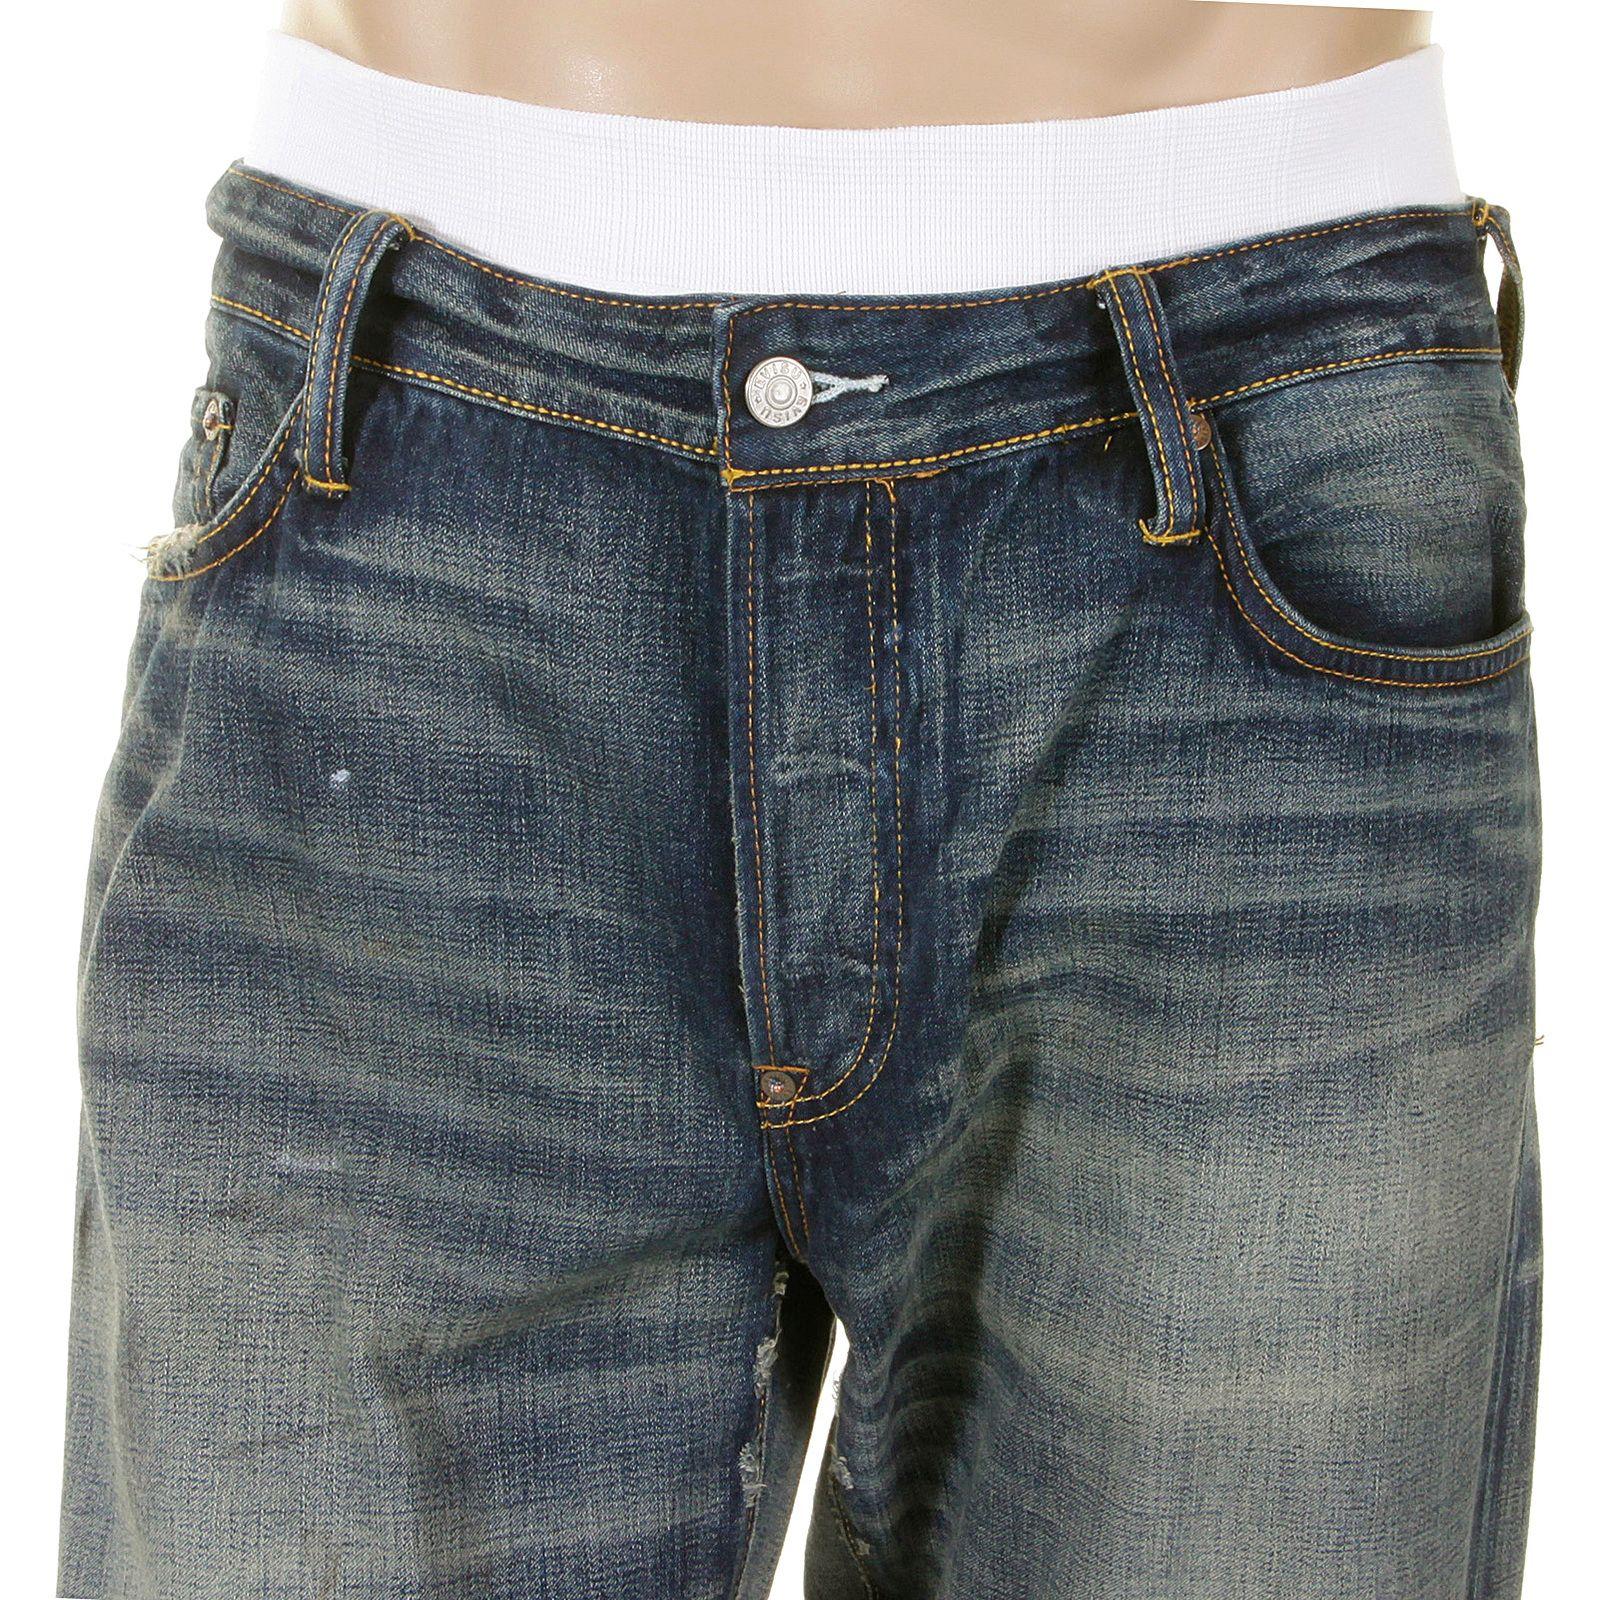 Denim and White Logo - Evisu Denim Jeans Featuring Whiskered and Faded Details